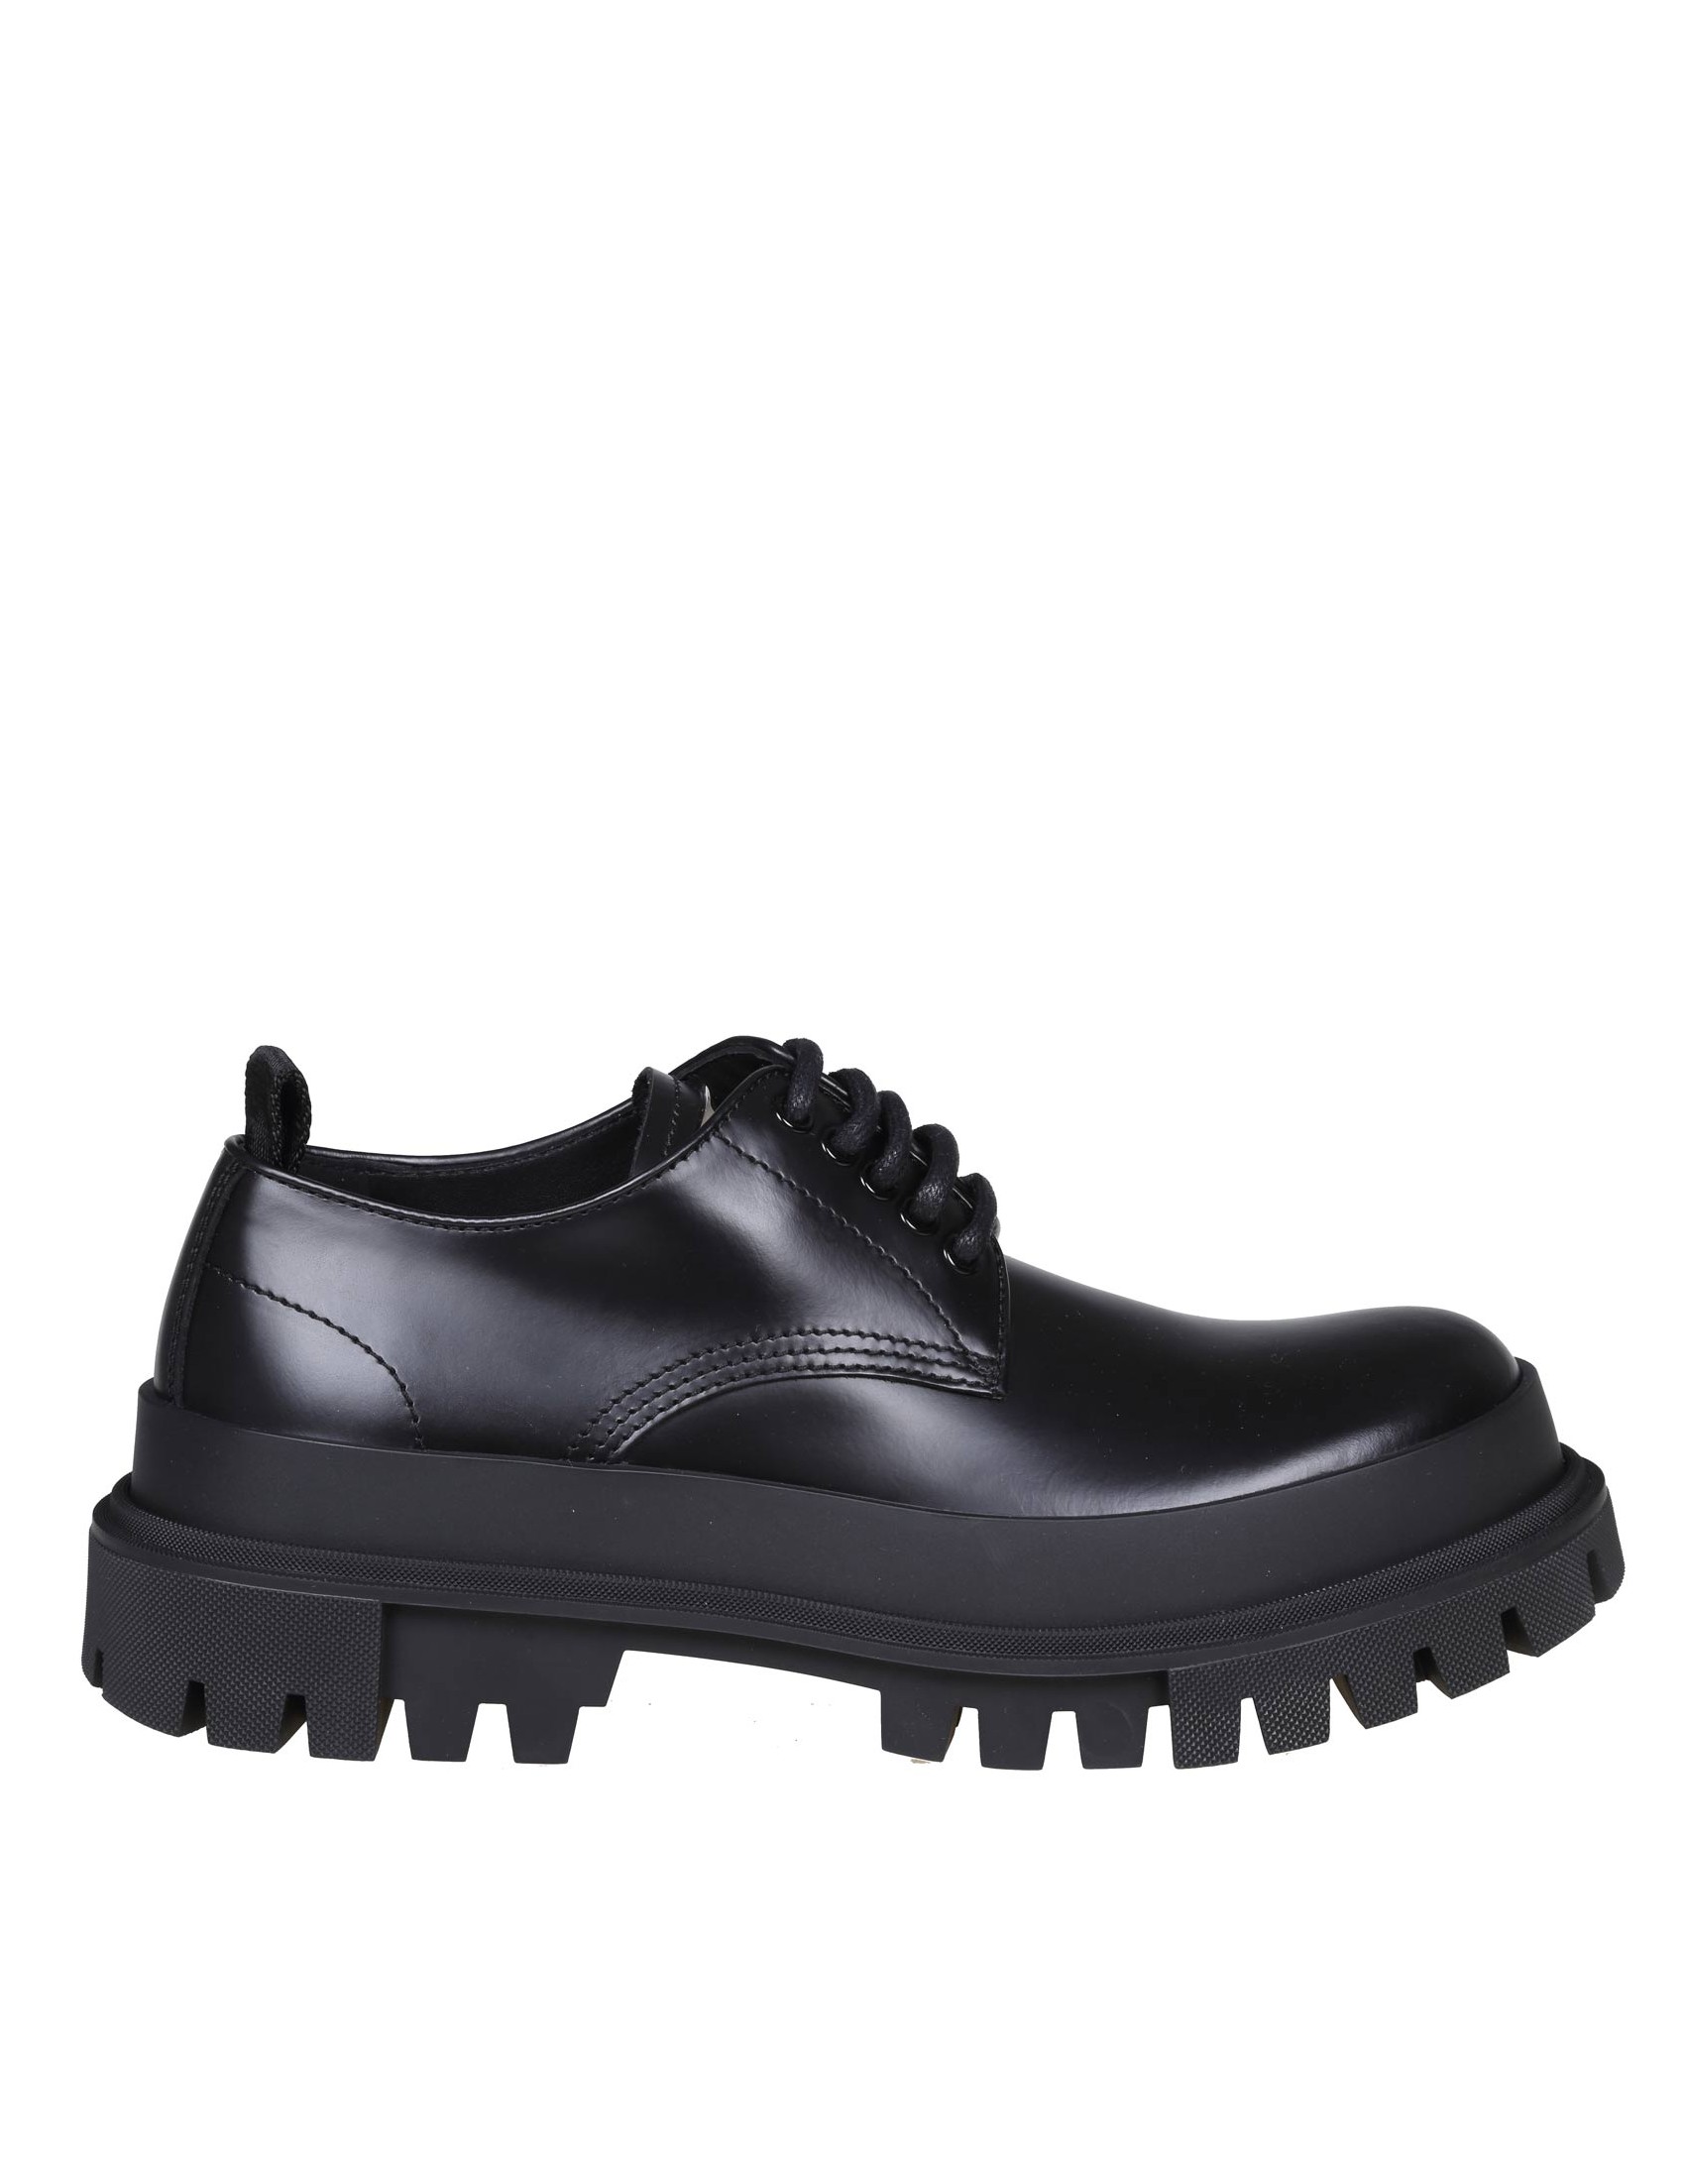 DOLCE & GABBANA LEATHER LACE-UP SHOES